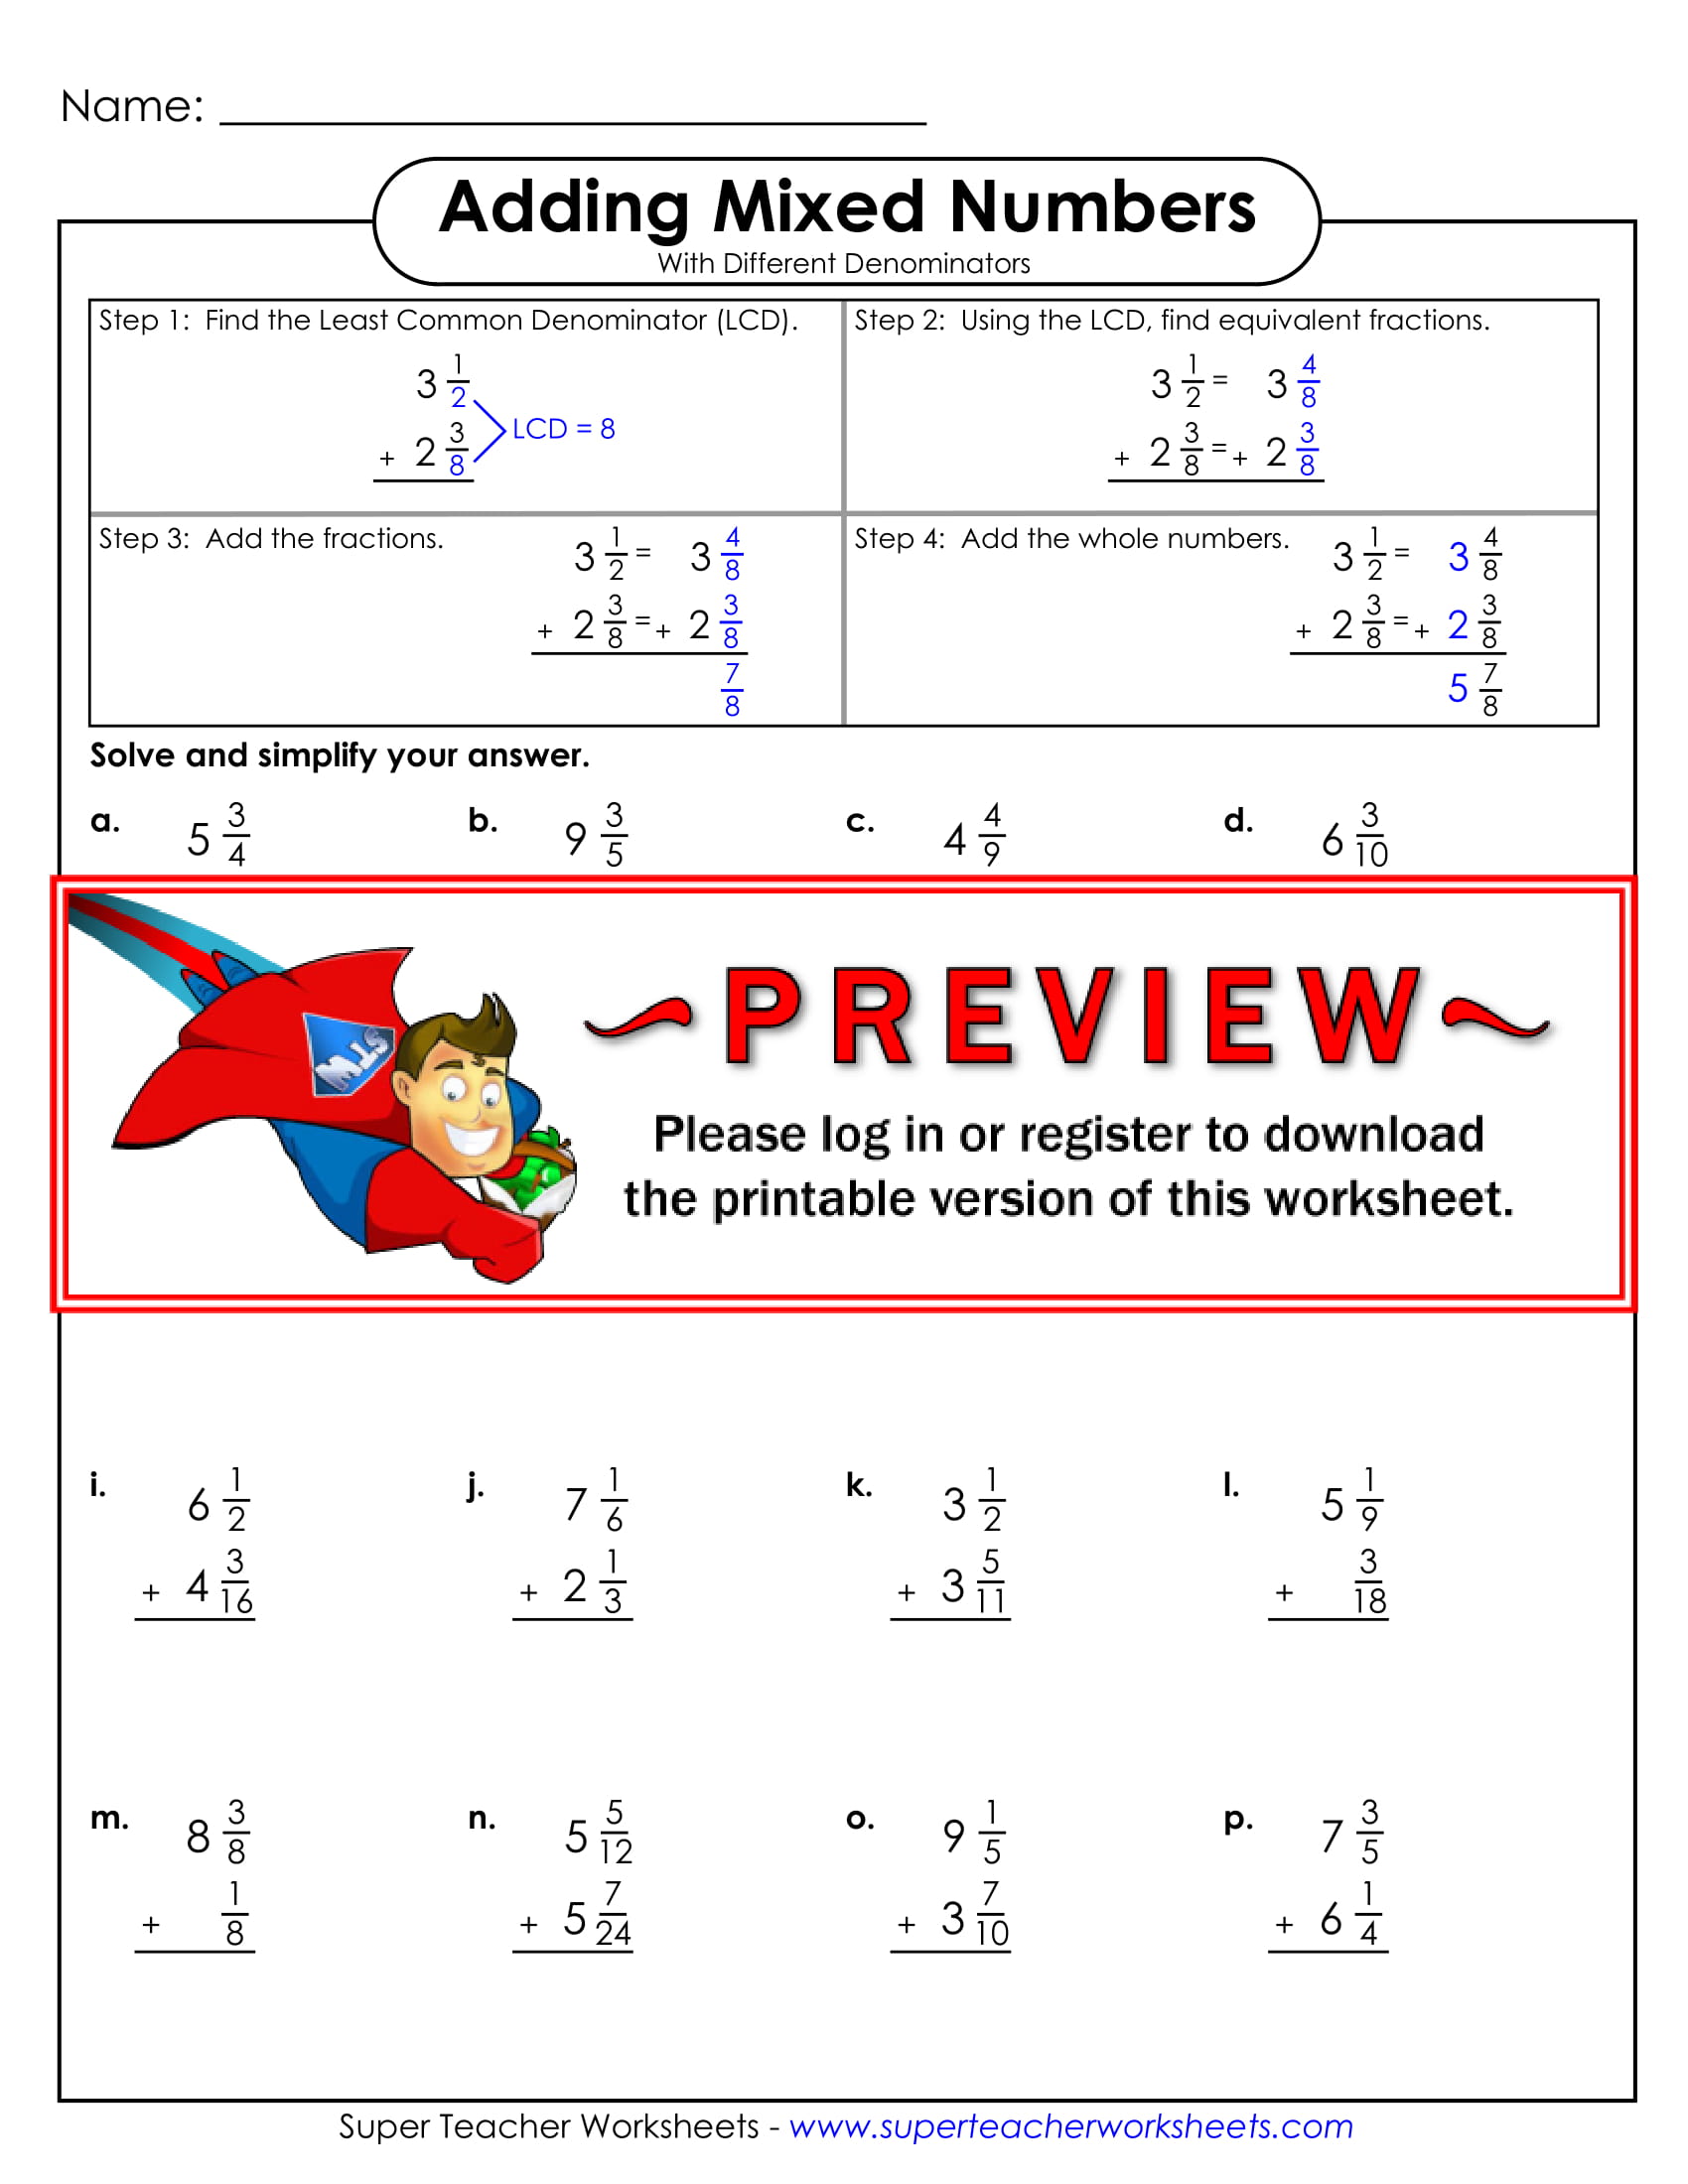 Add Mixed Numbers Worksheet